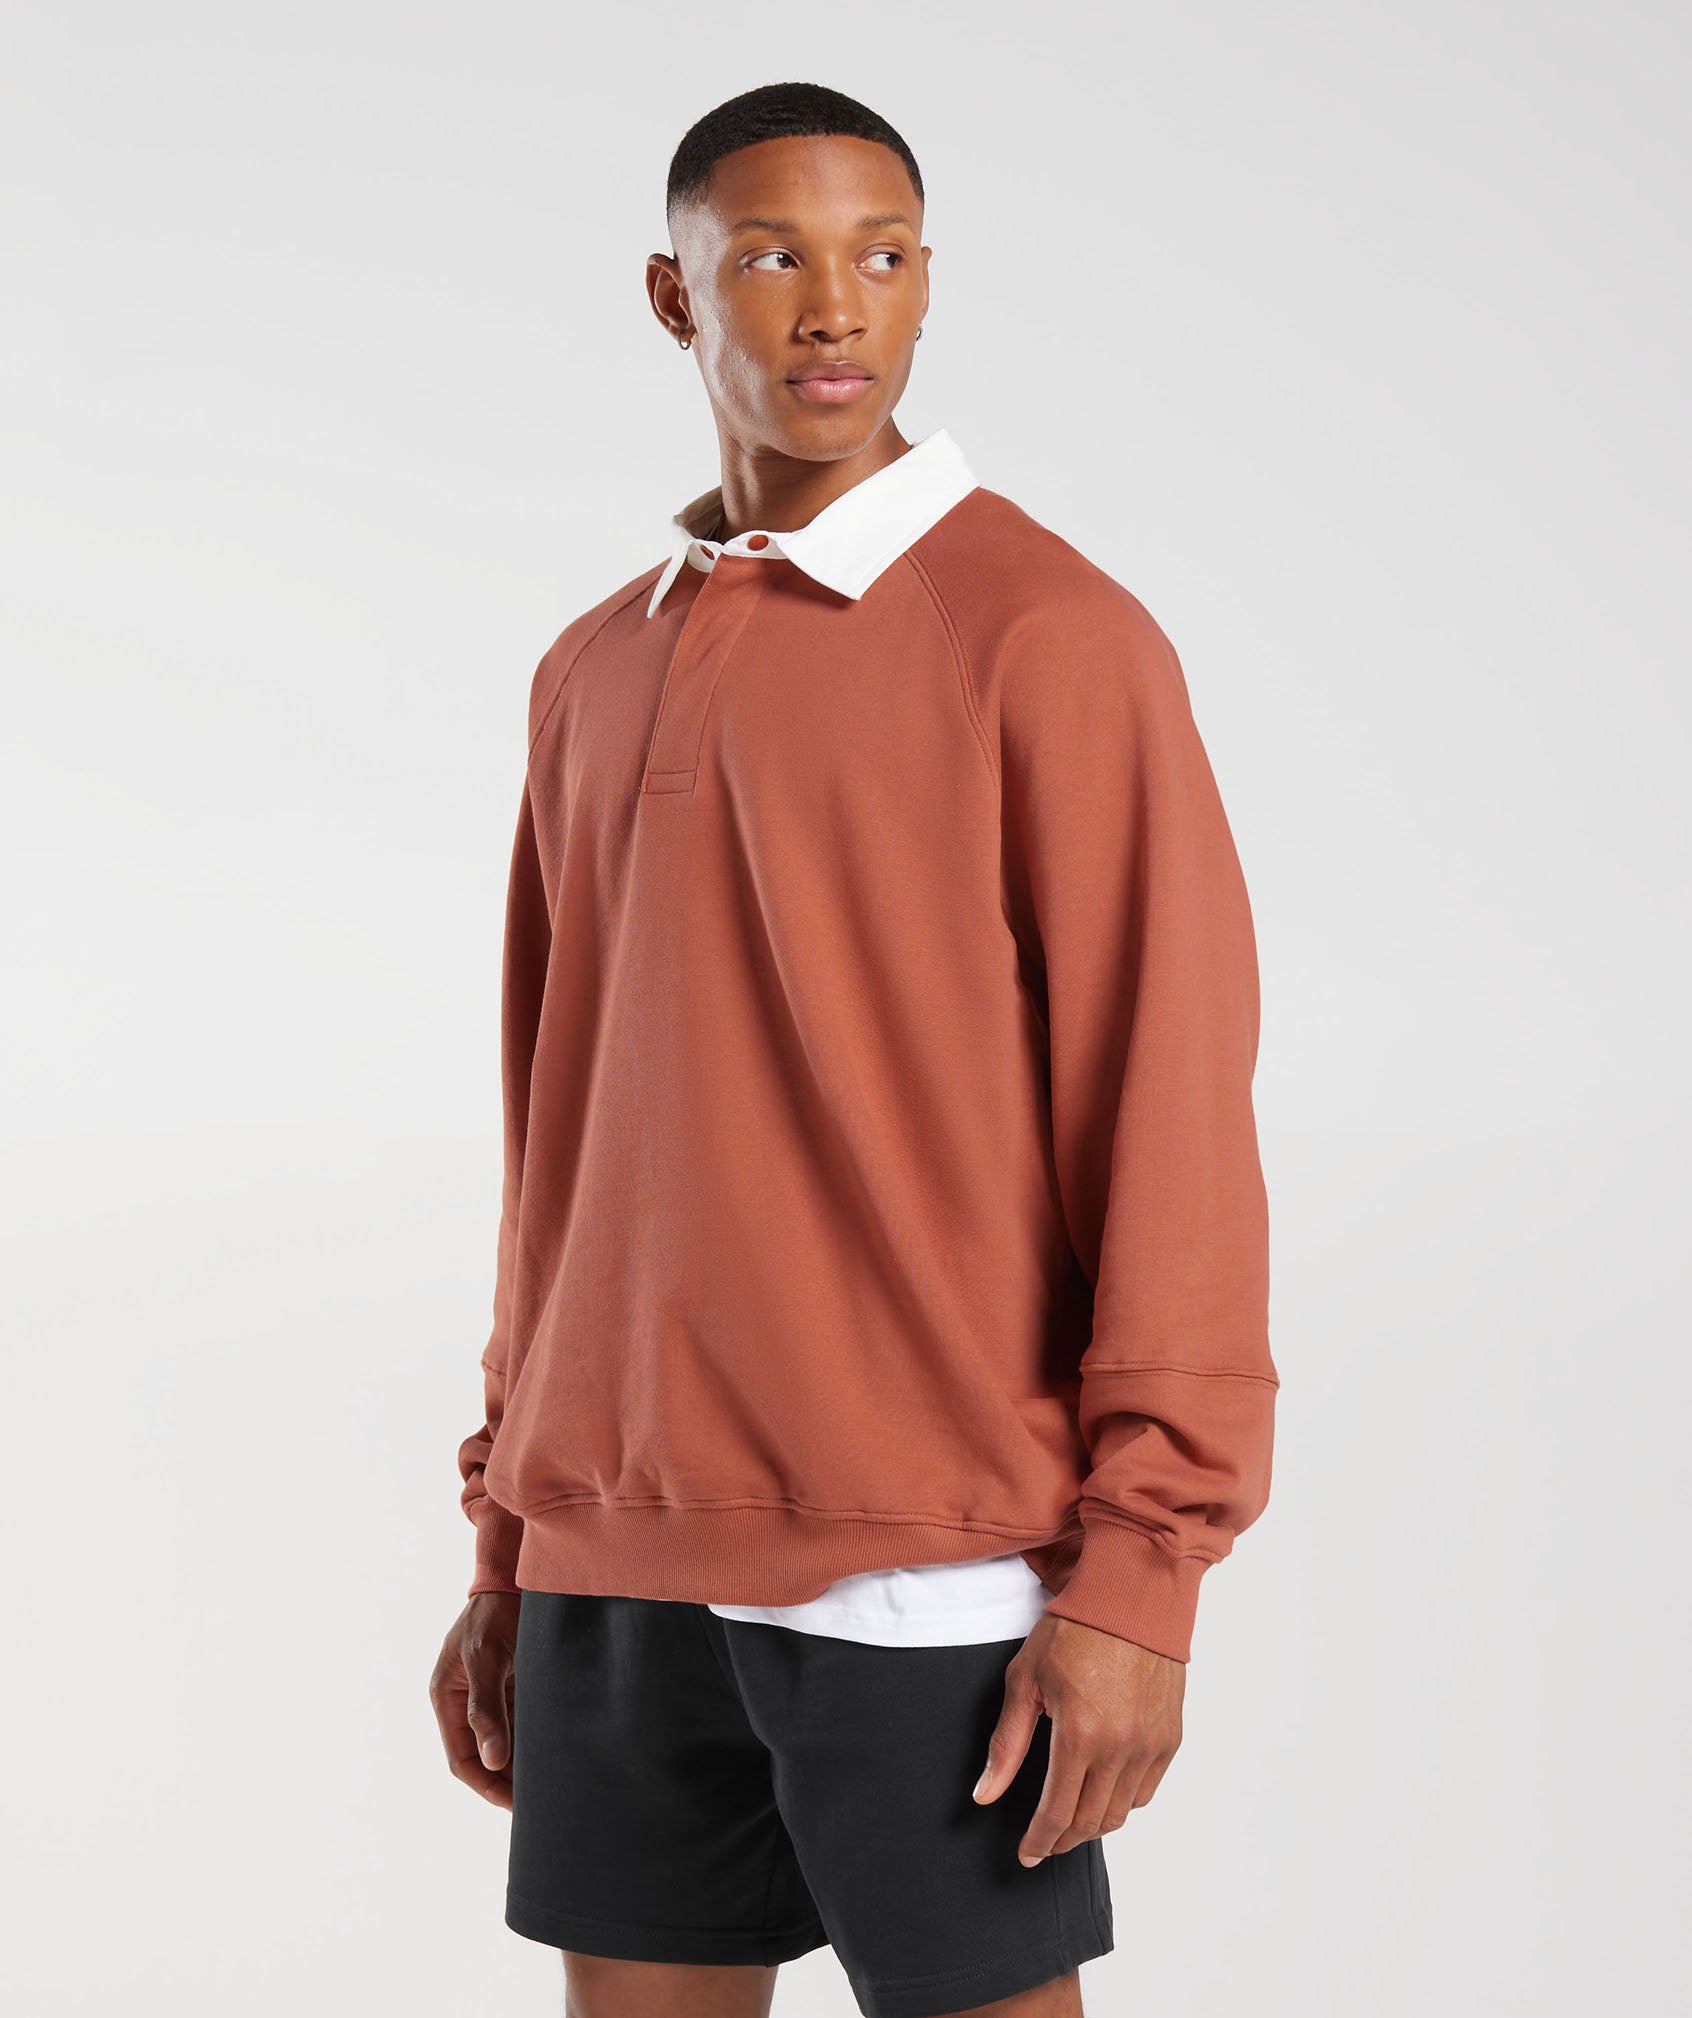 Rest Day Essentials Sweat Polo in Persimmon Red - view 3